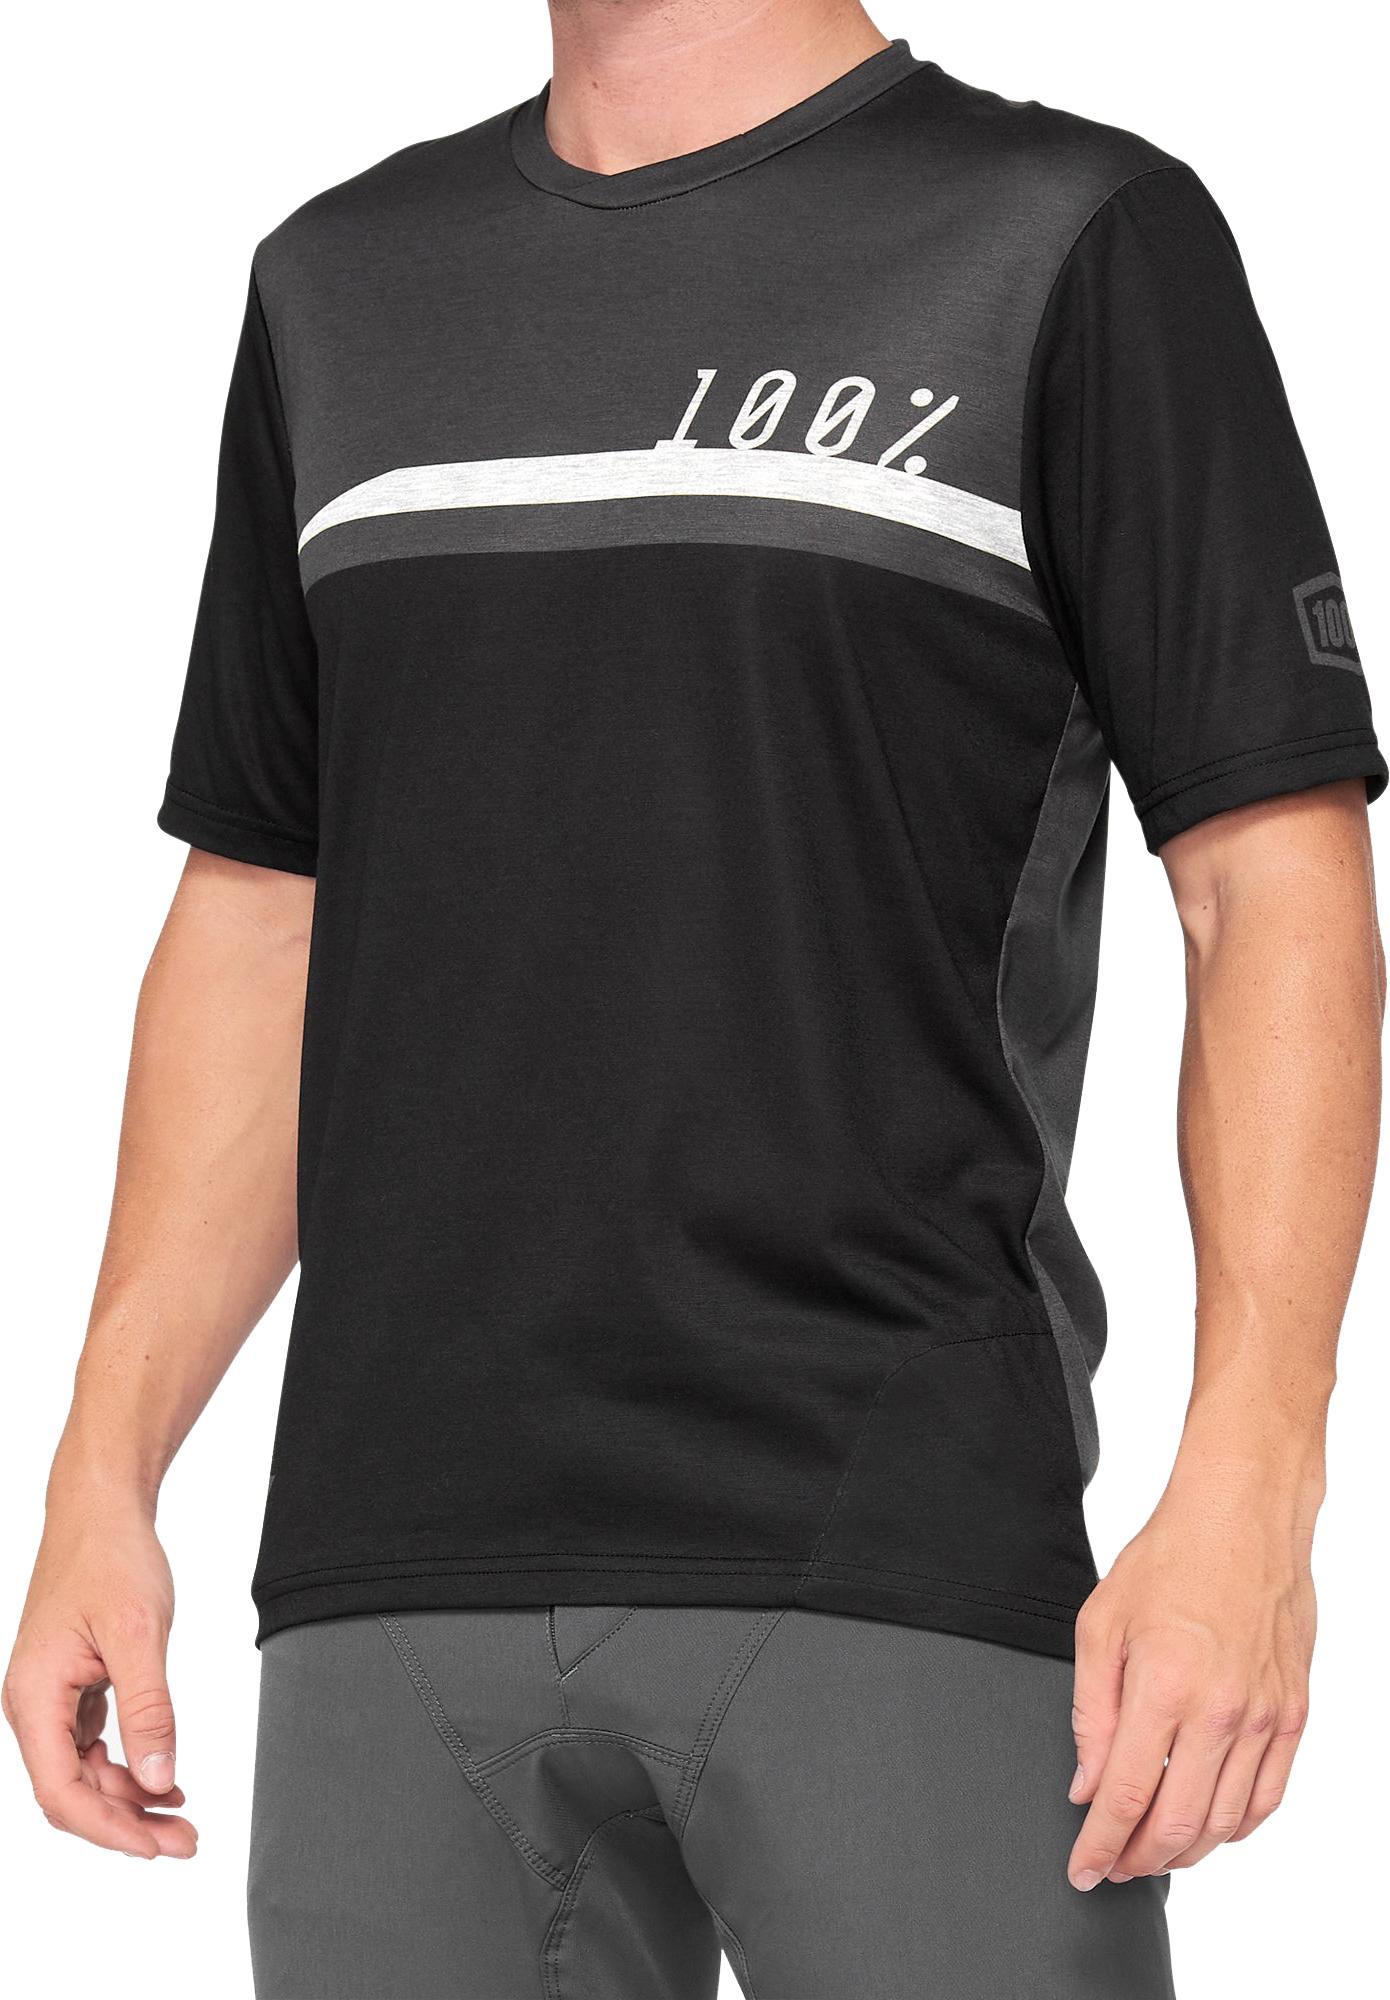 100% Airmatic Jersey - Black/charcoal